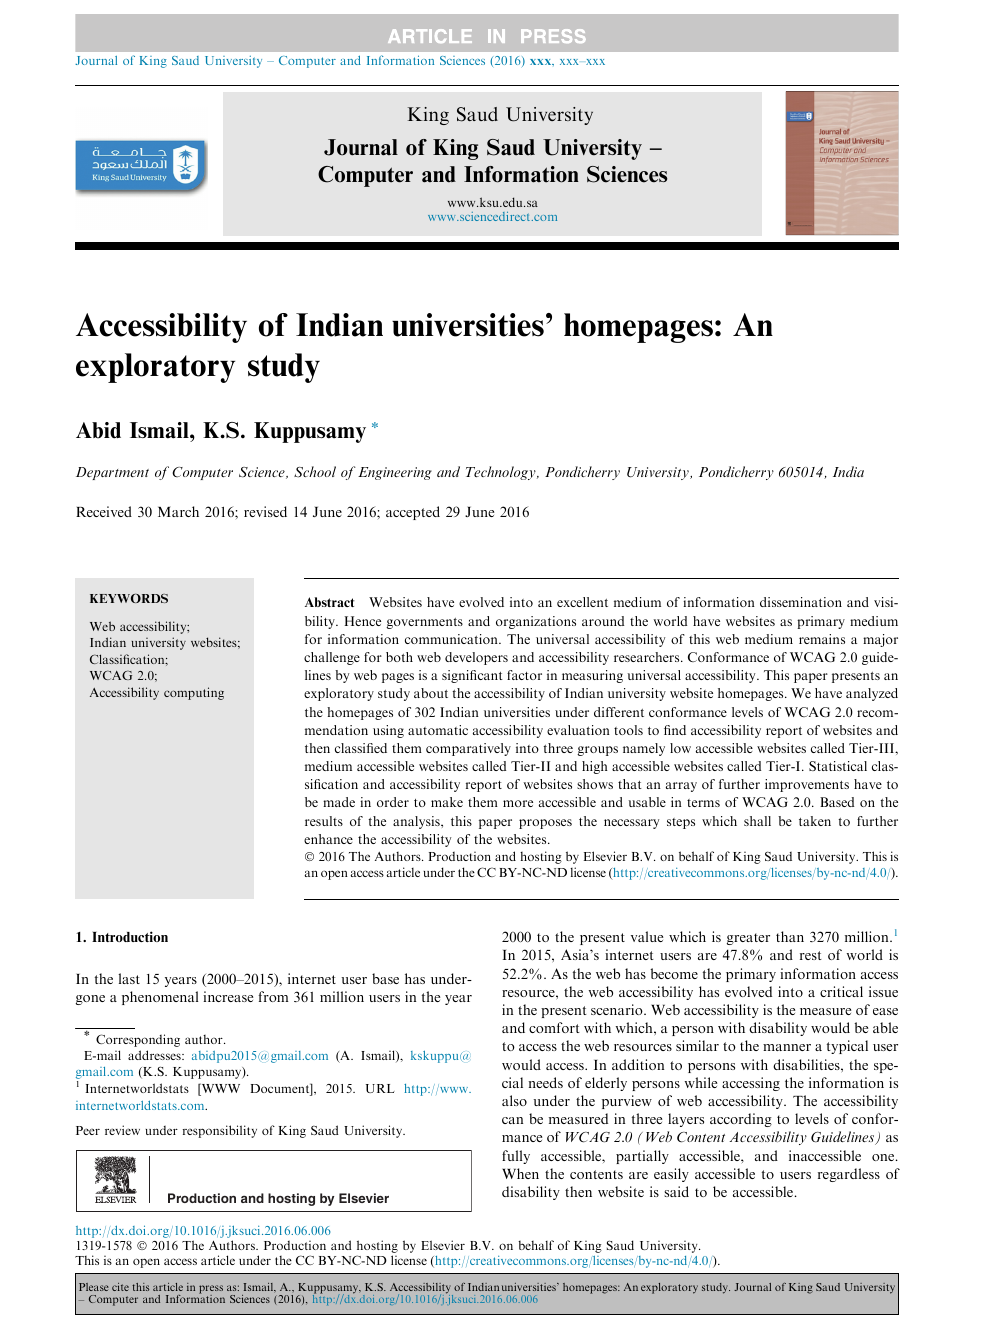 Accessibility Of Indian Universities Homepages An Exploratory Study Topic Of Research Paper In Computer And Information Sciences Download Scholarly Article Pdf And Read For Free On Cyberleninka Open Science Hub